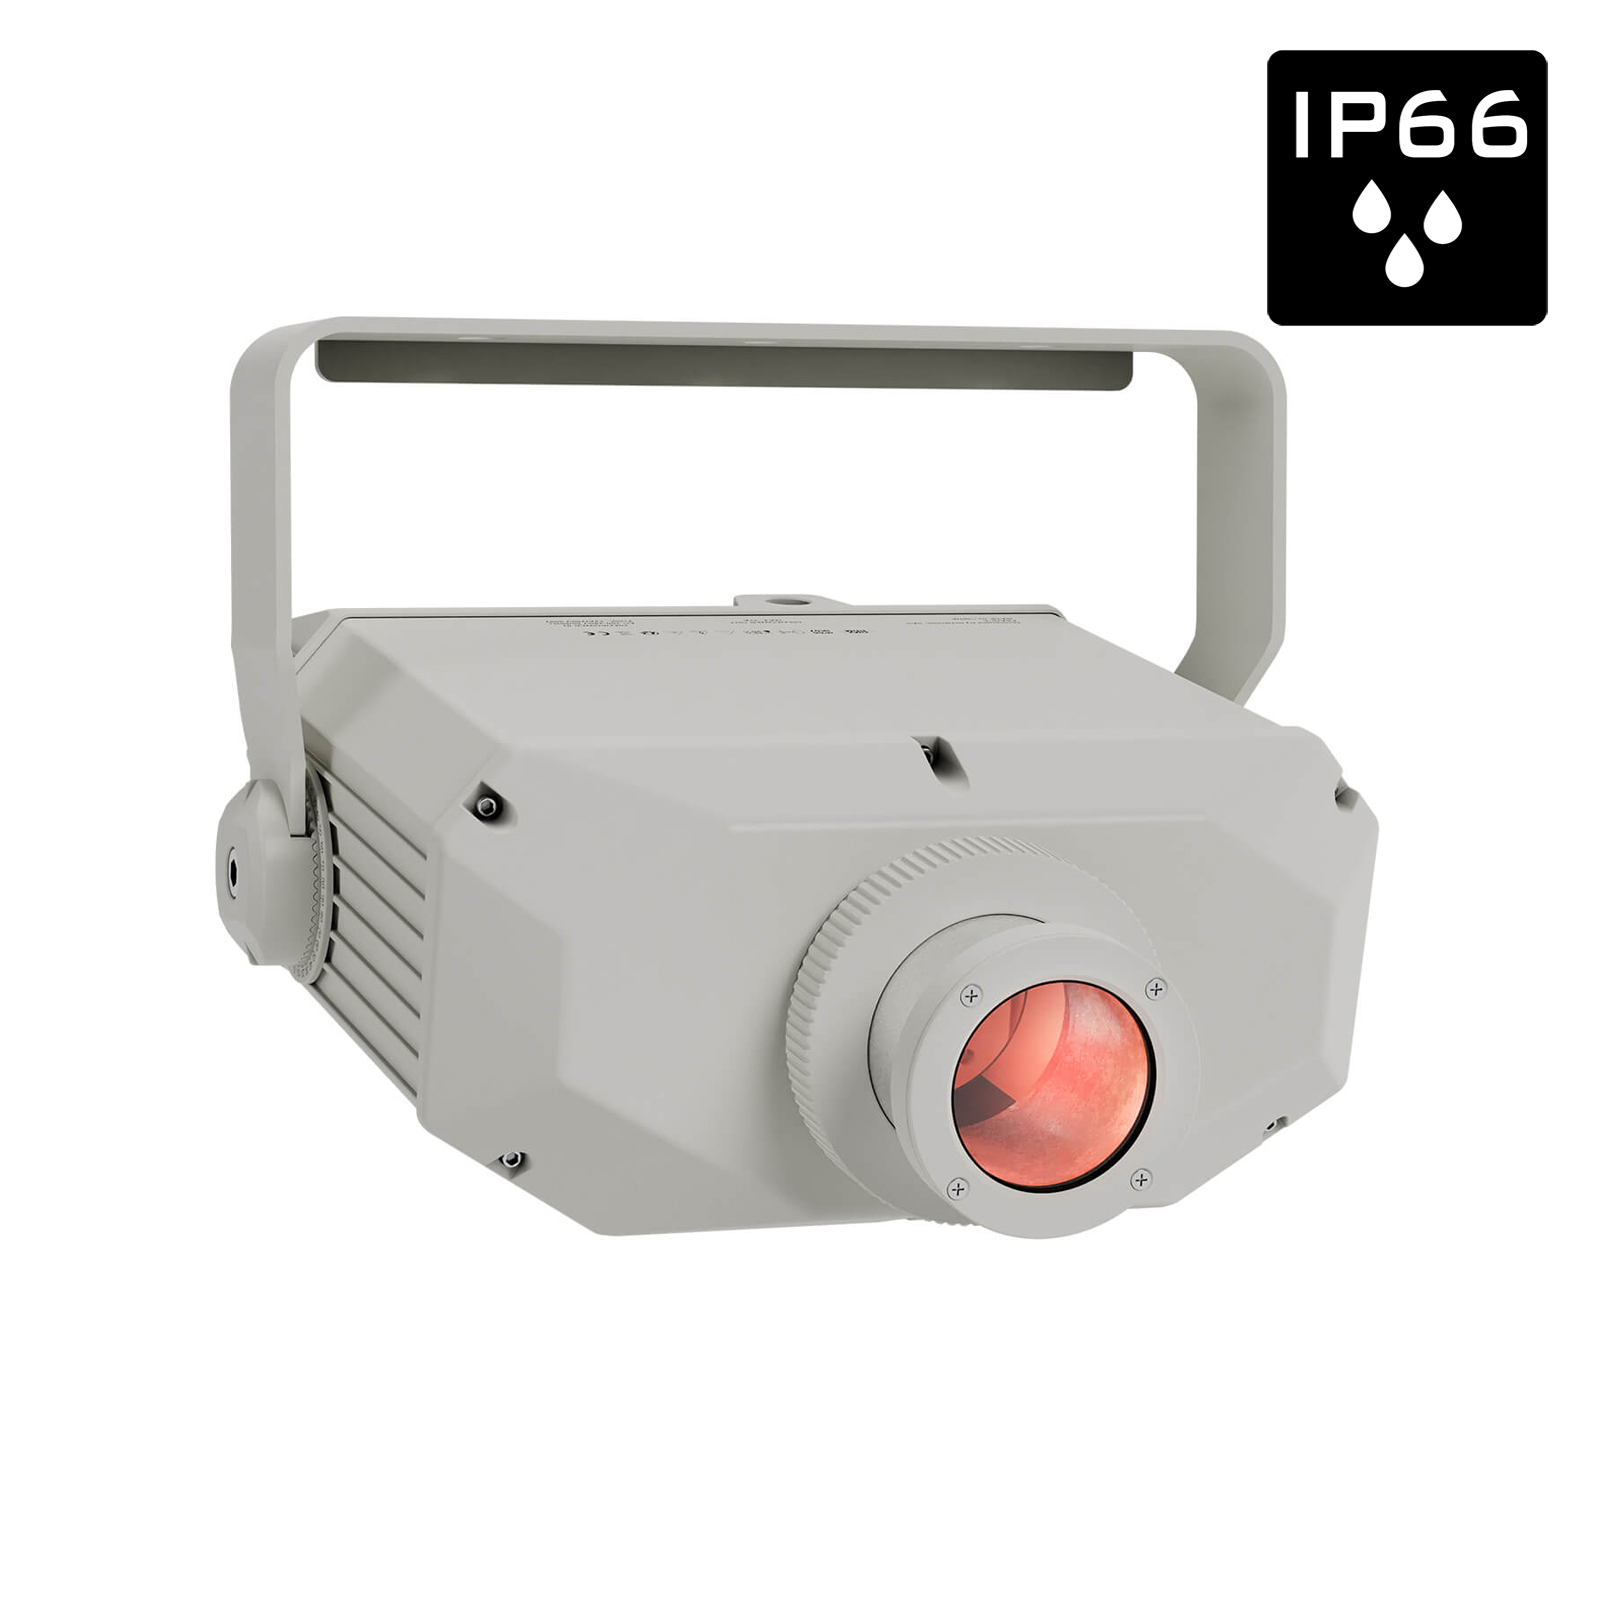 Architectural projector color water effect IP66 - LED 90W - 7800K - 25-, 40- and 55-